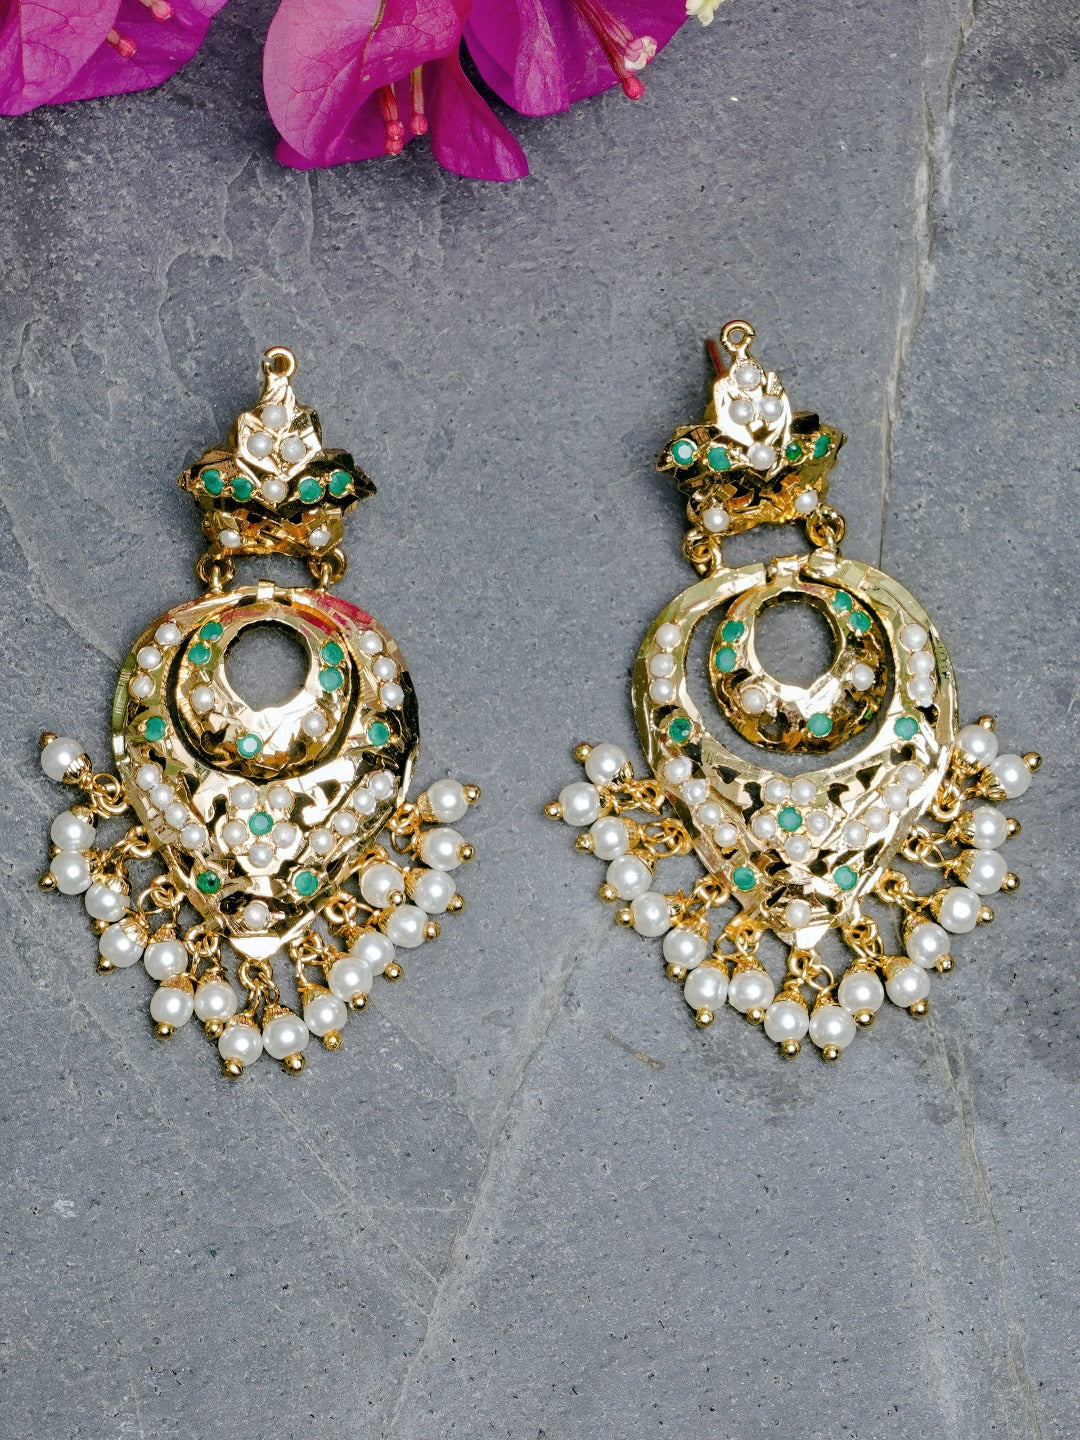 Adhira Jadau Chaandbali Earrings (Gold Plated with Emerald Green Stones and White Pearls) - QUEENS JEWELS